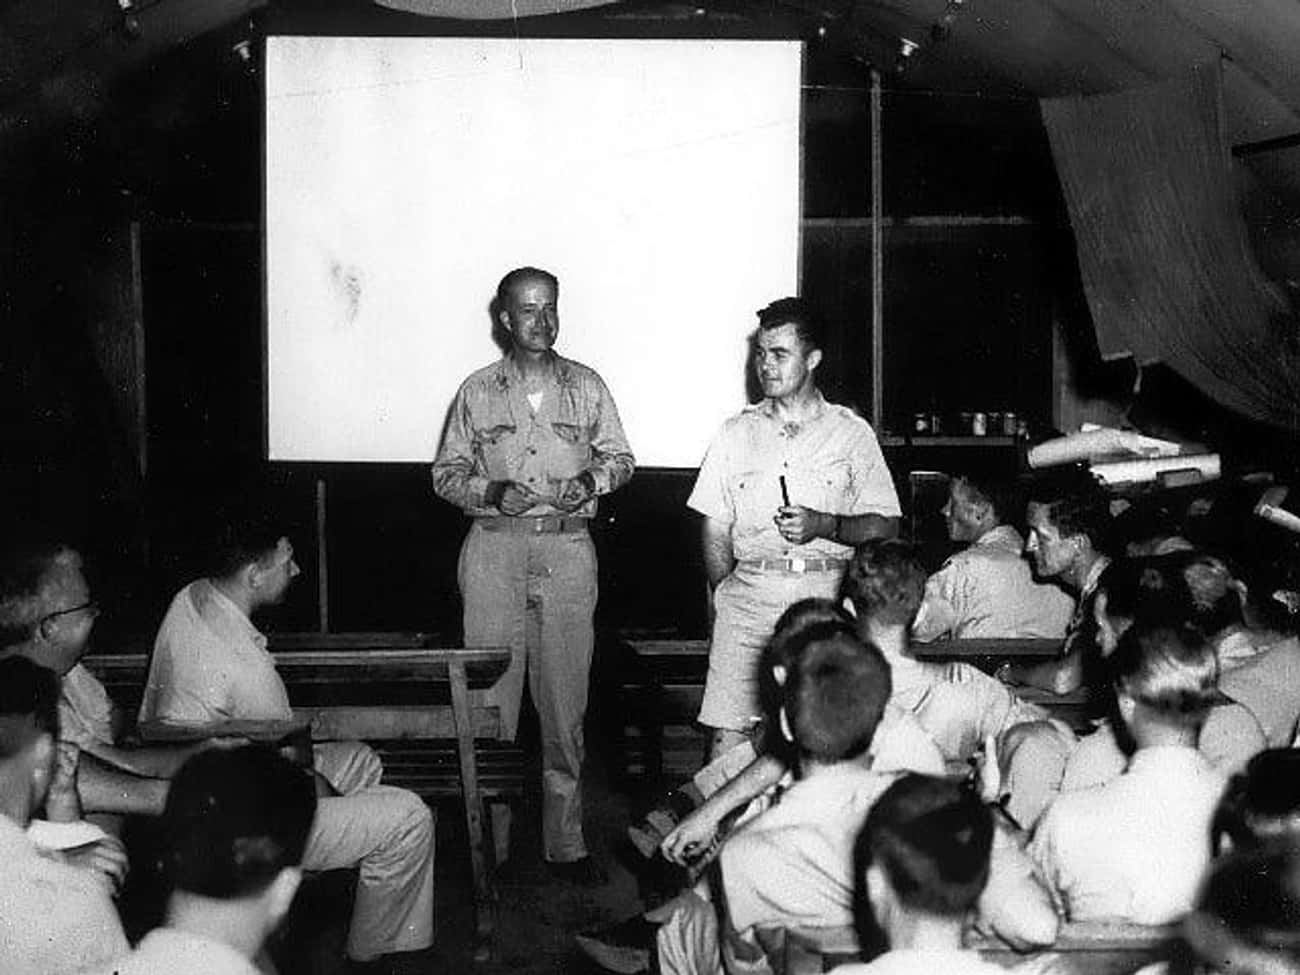 August 6, 1945 - 00:00 - Six Flight Crews Are Summoned For Their Final Briefings